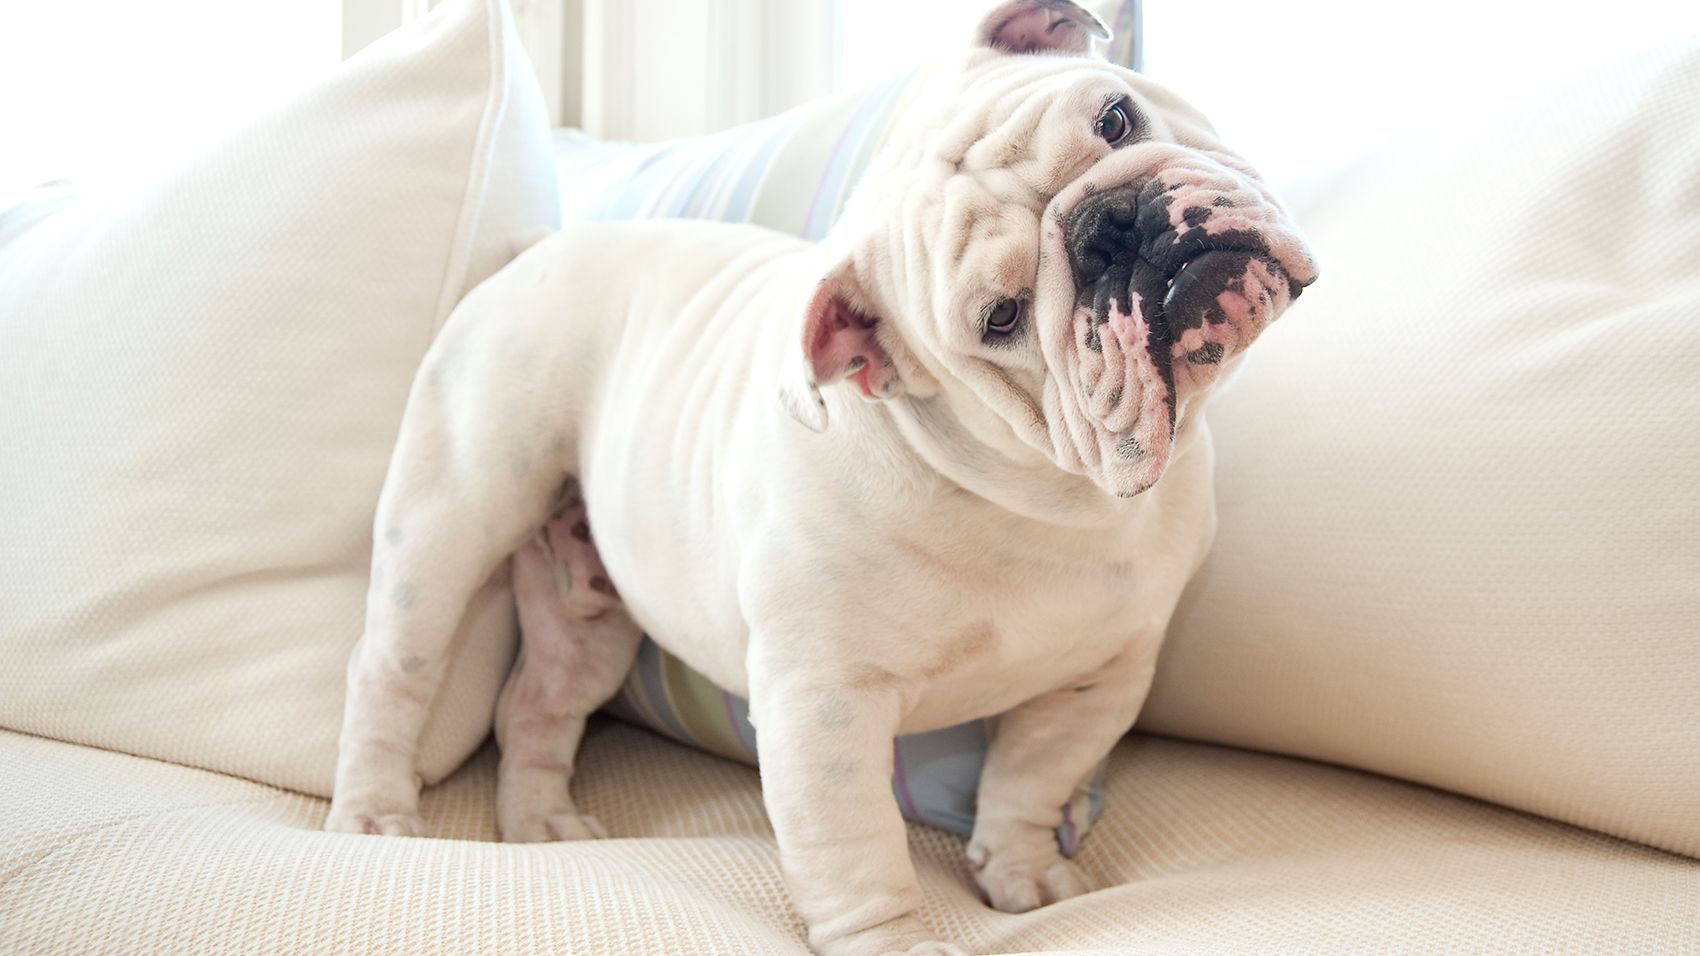 18 simple ways to remove pet hair from clothes, couches and car